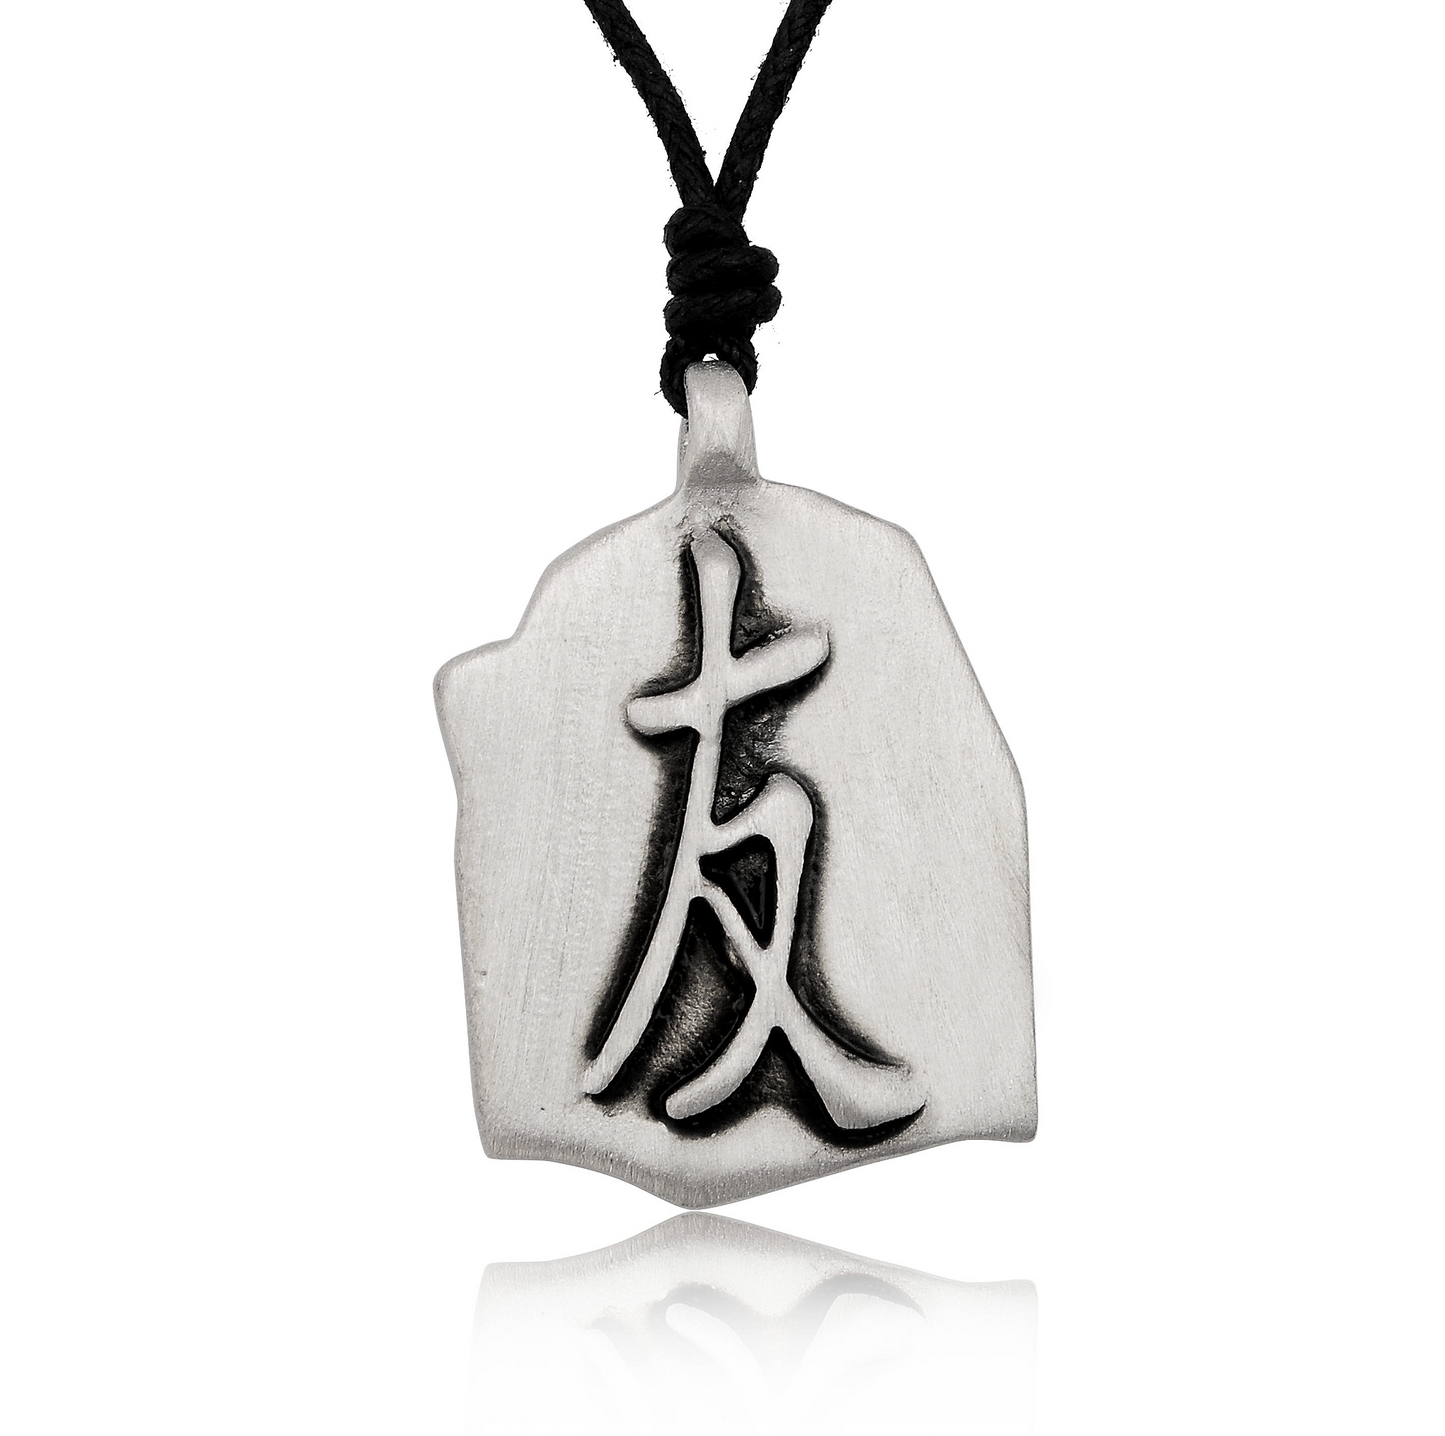 Chinese Word Love Silver Pewter Charm Necklace Pendant Zodiac Symbol Jewelry